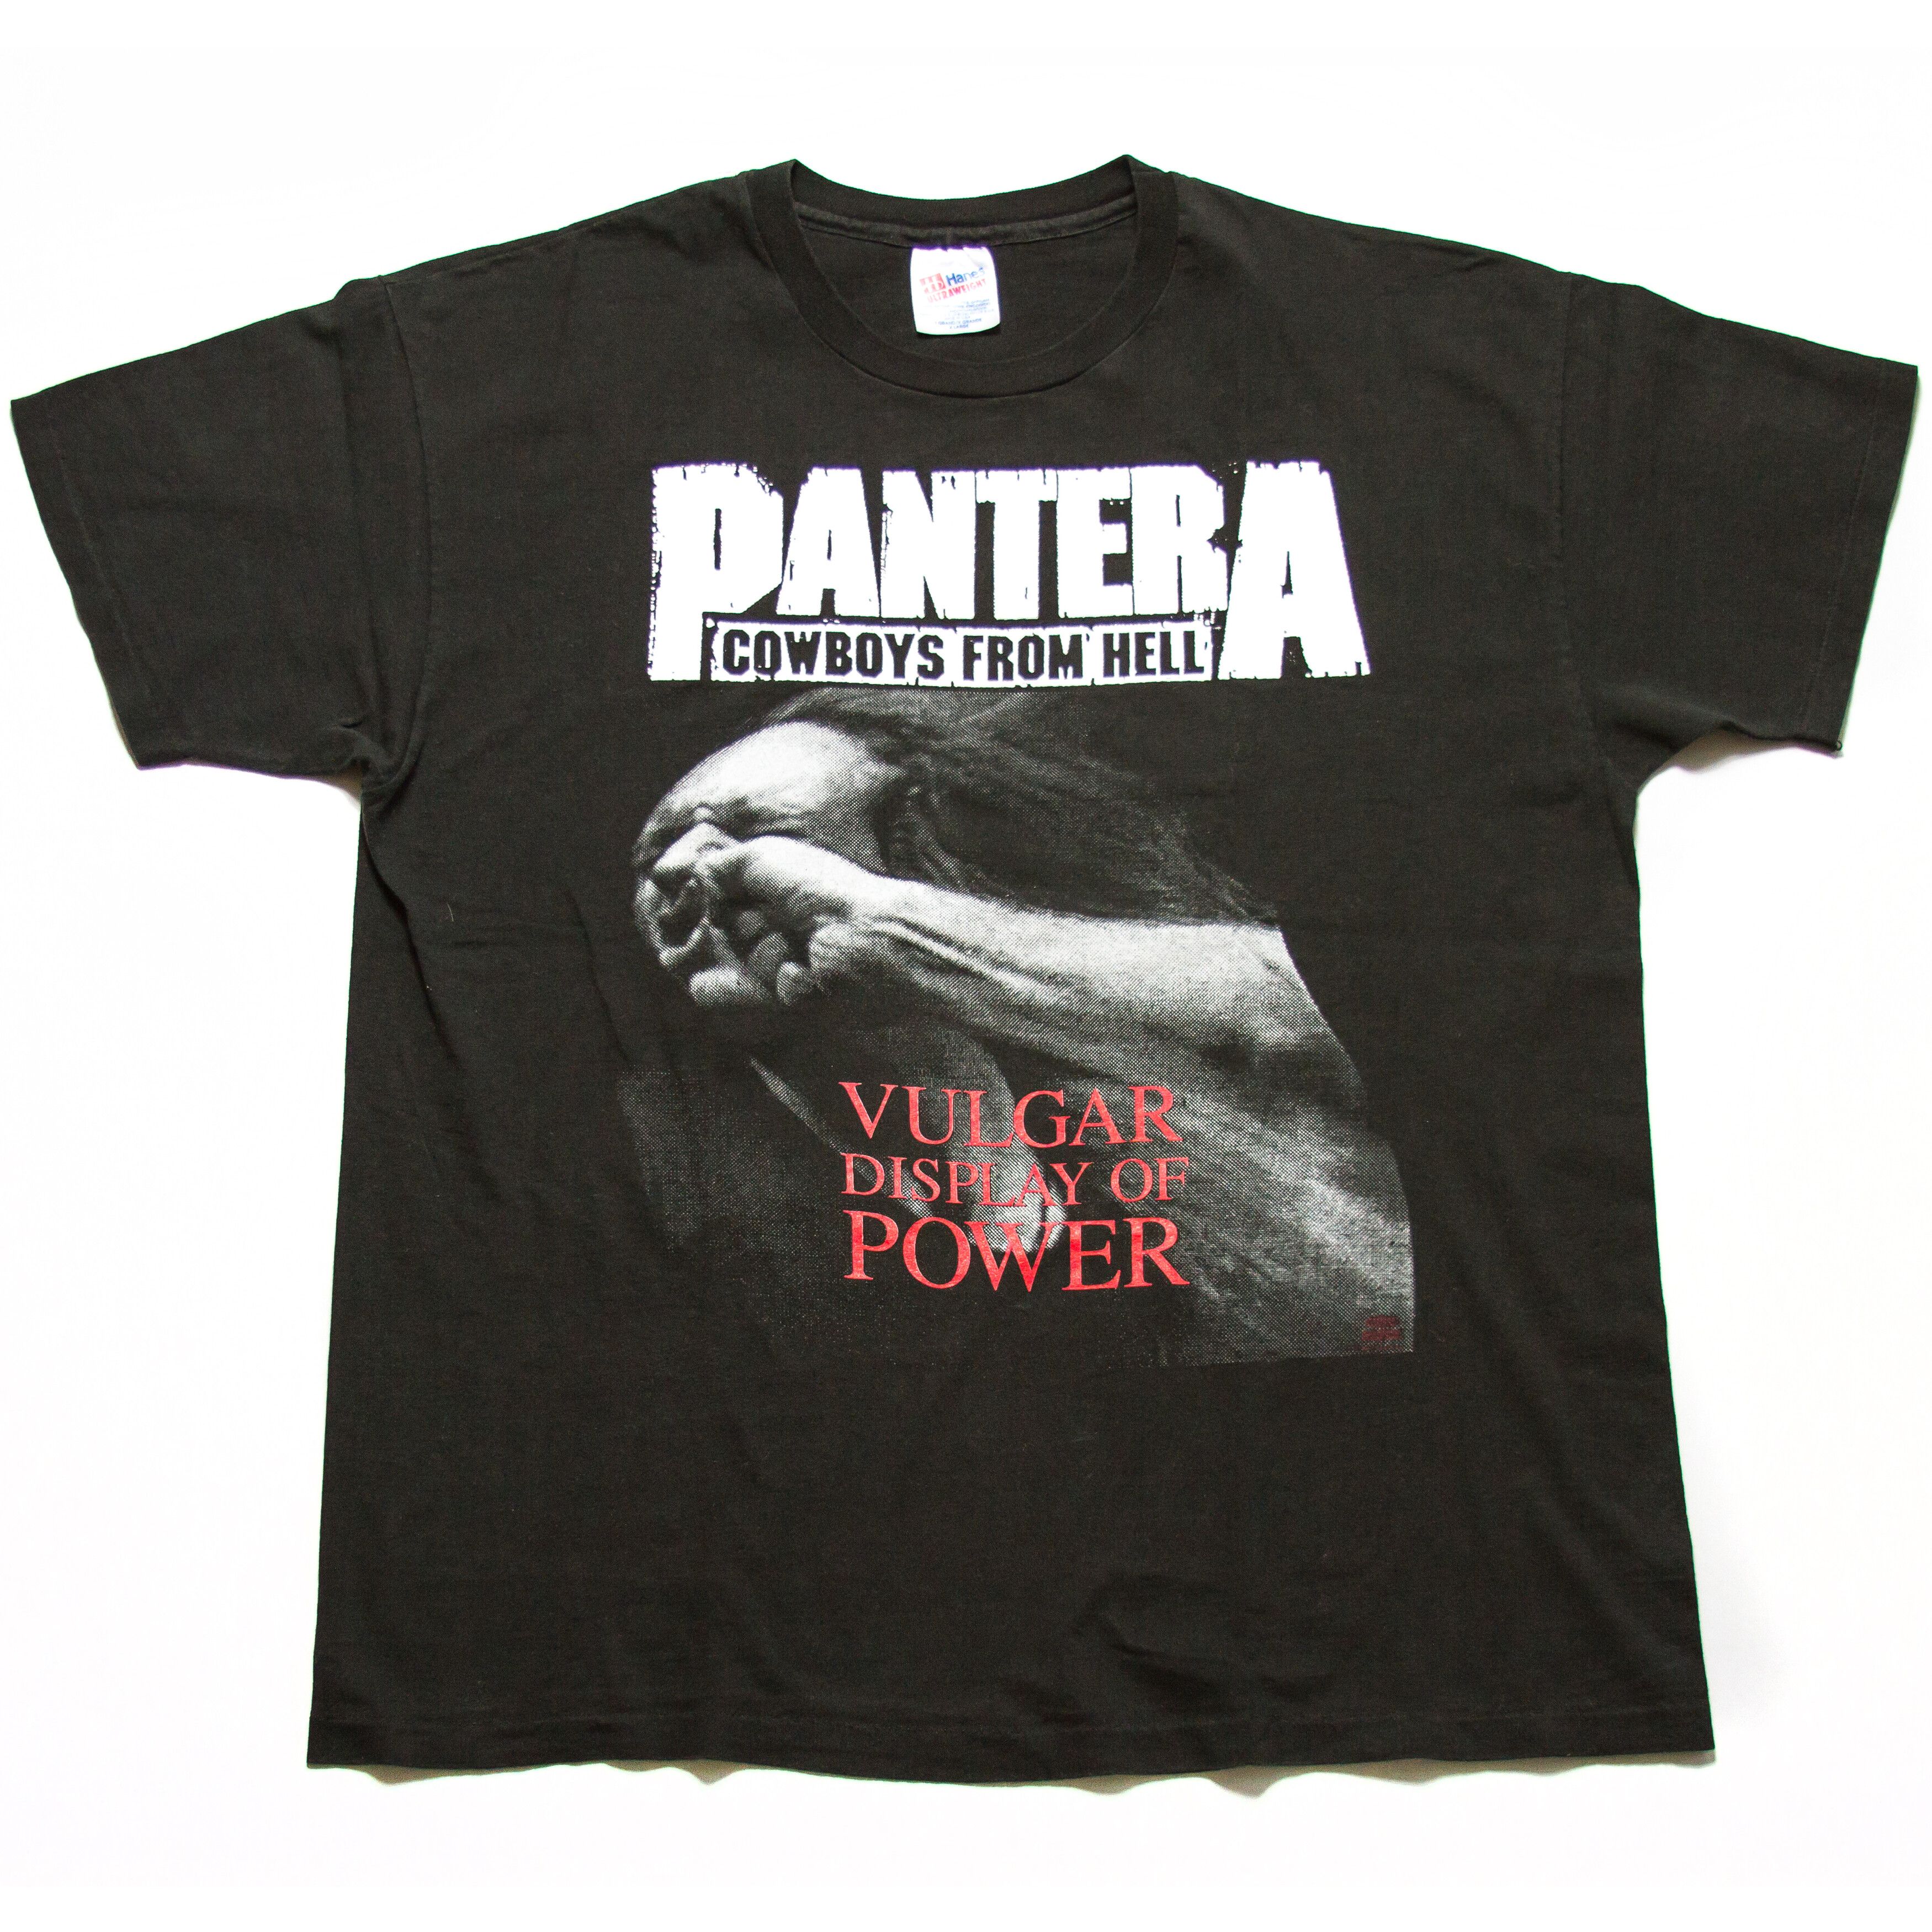 Vintage Pantera "Cowboys From Hell" T-Shirt Size US XL / EU 56 / 4 - 1 Preview